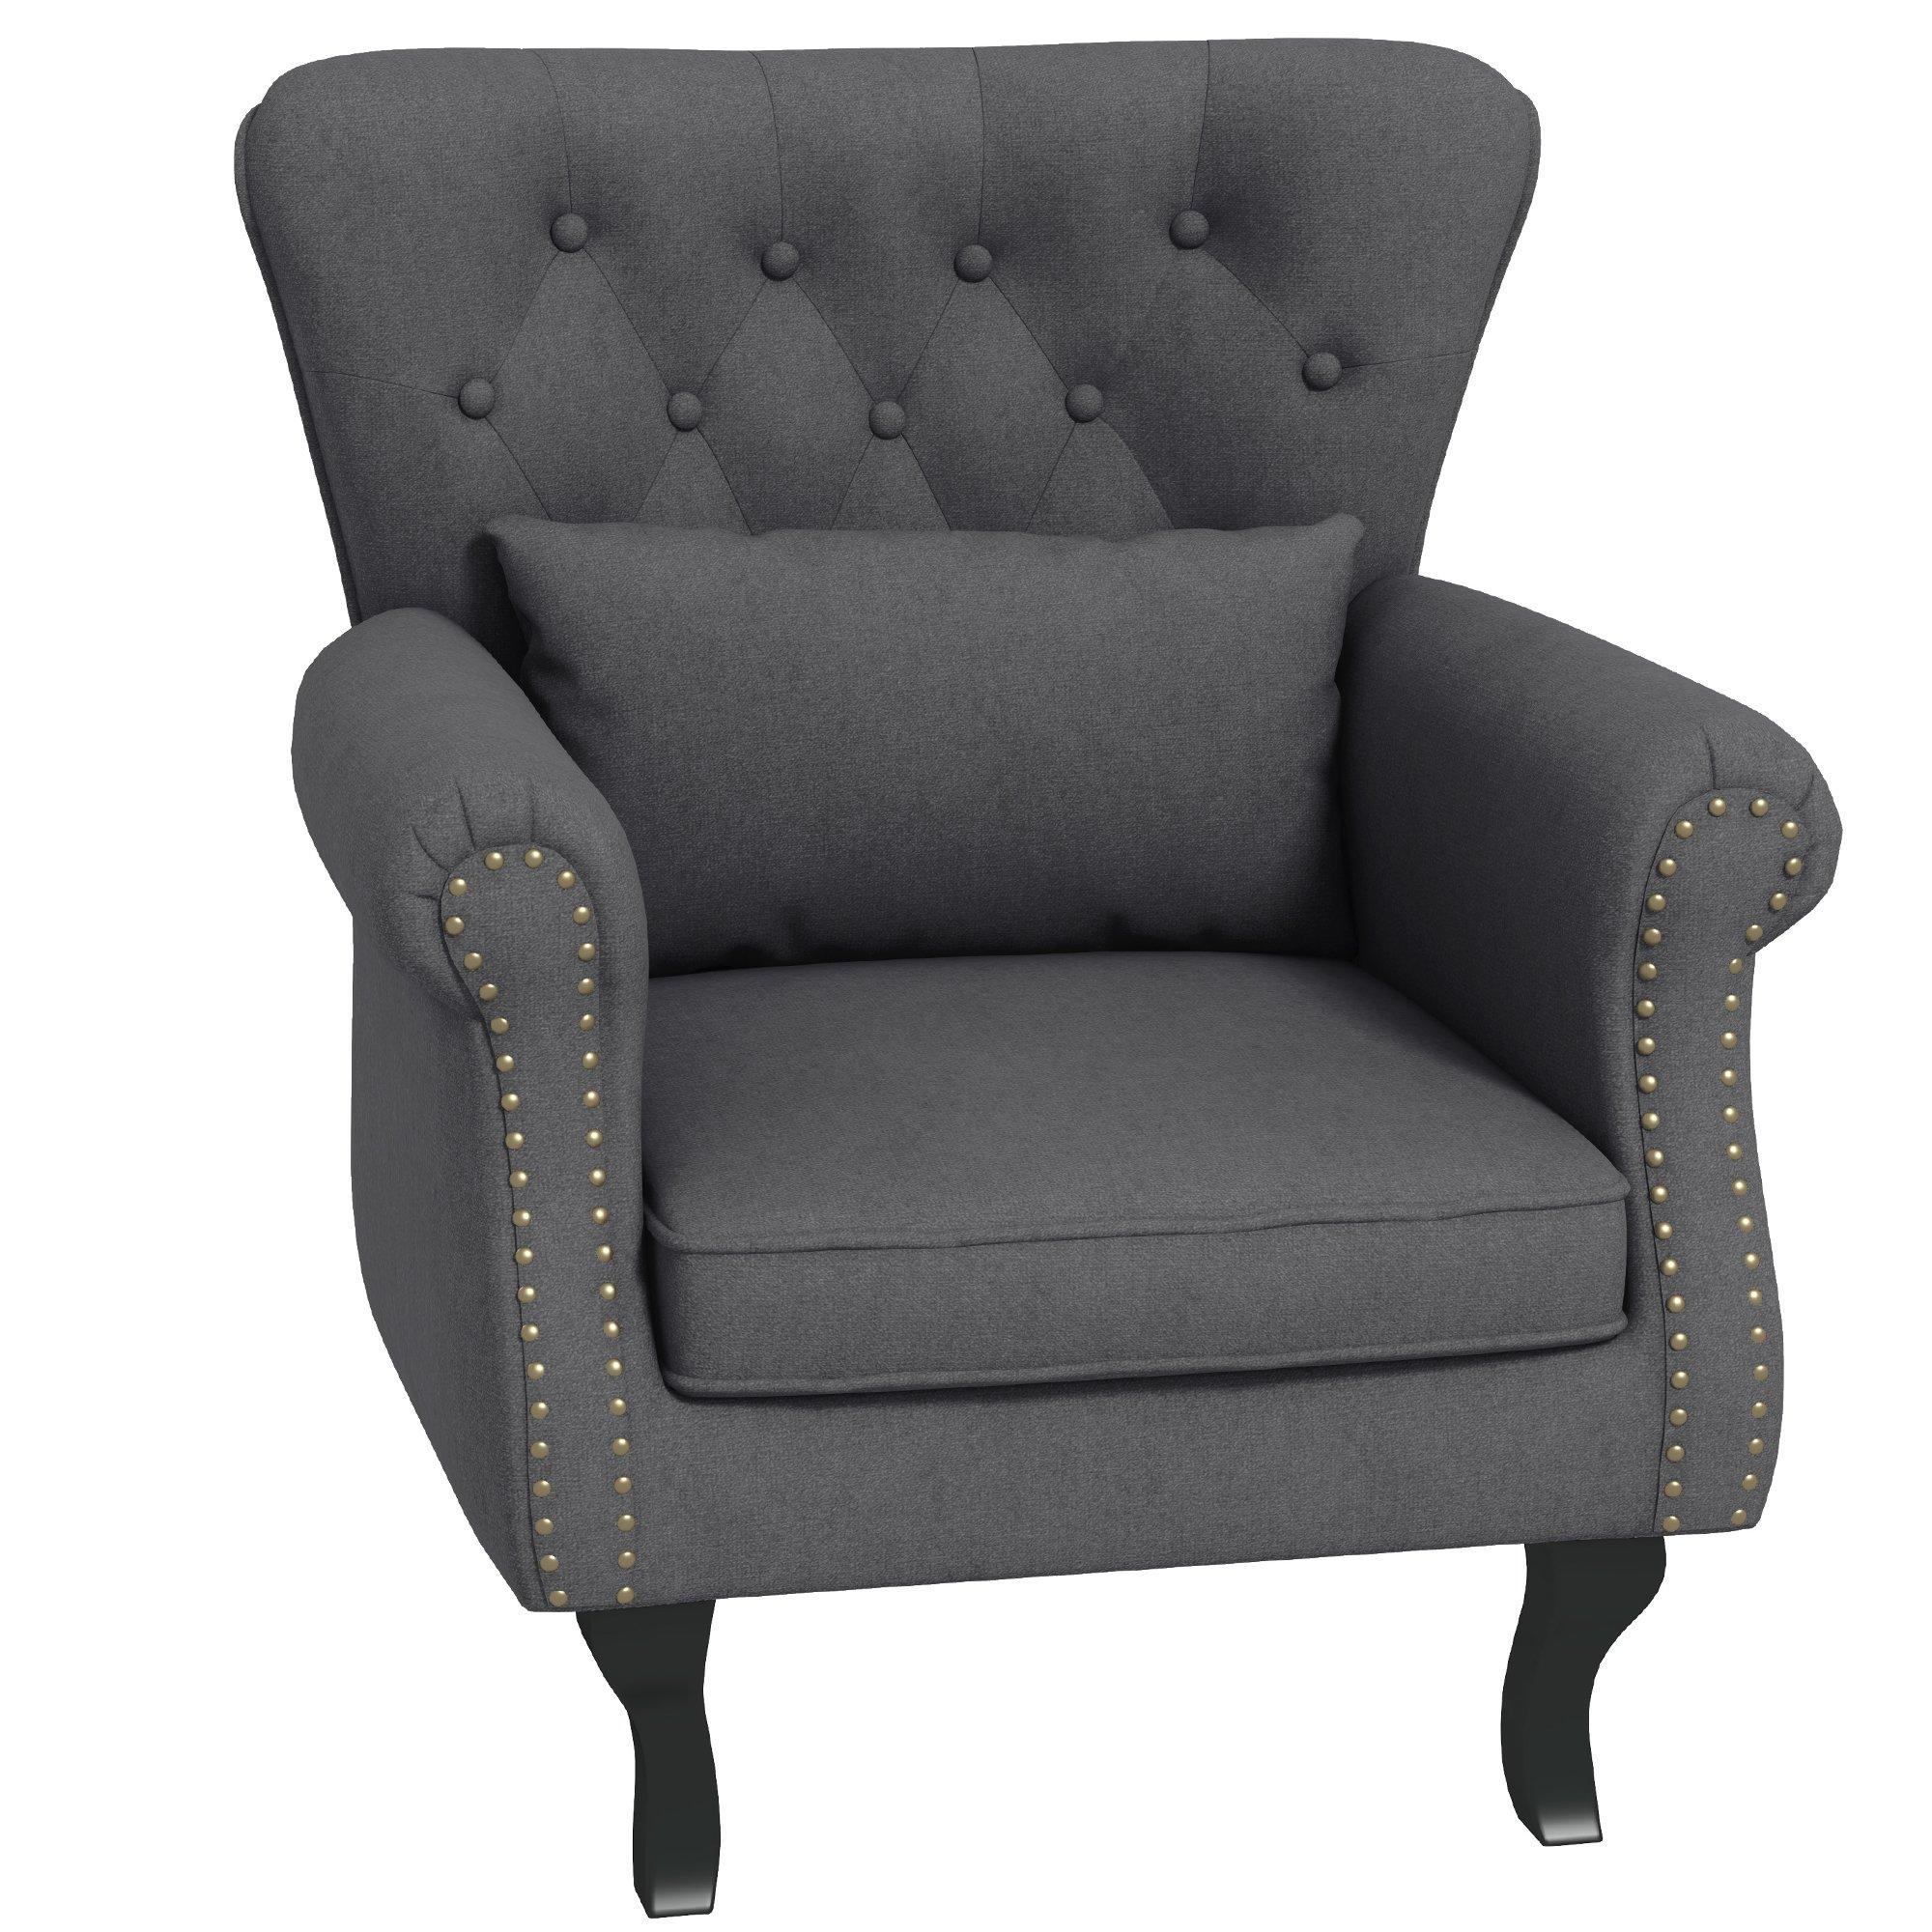 Chesterfield style Accent Chair Tufted Wingback Armchair with Pillow